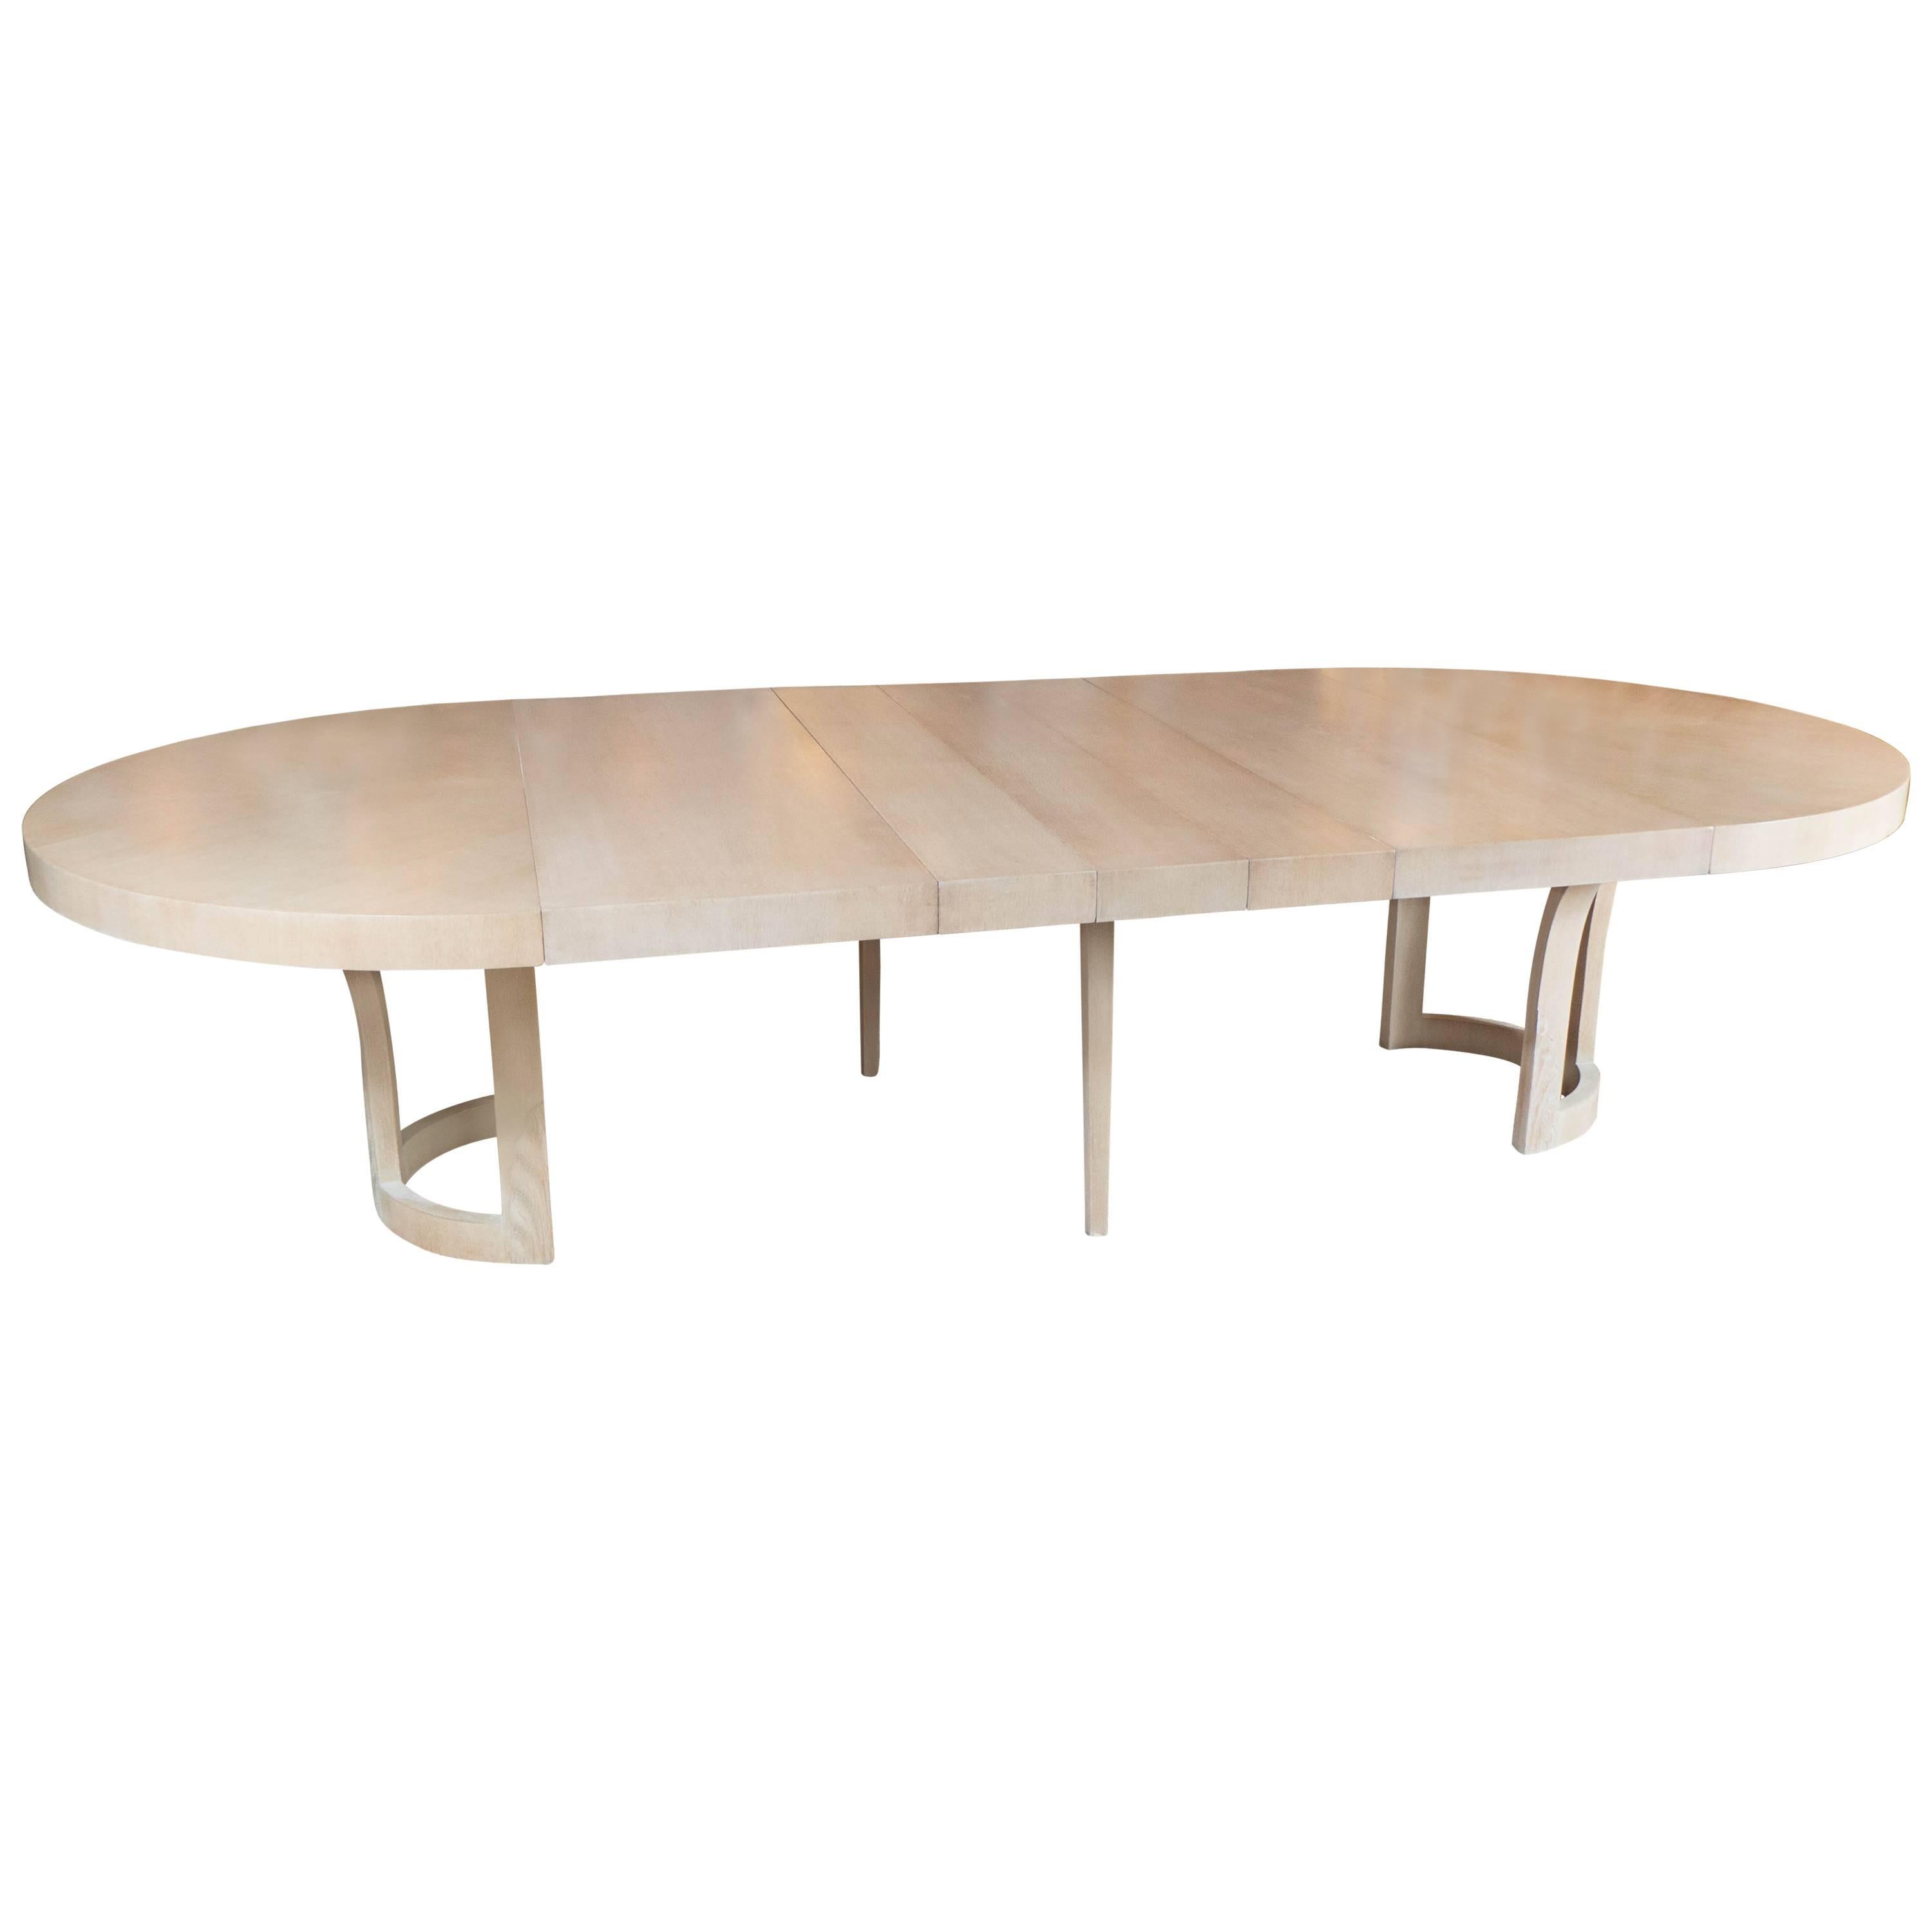 A gorgeous and very rare extendable dining table in bookmatched cerused white oak for Schmieg & Kotzian by Dorothy Draper. A decorative foliage pattern stems from its base. A very sturdy yet graceful design by one of America's Hollywood